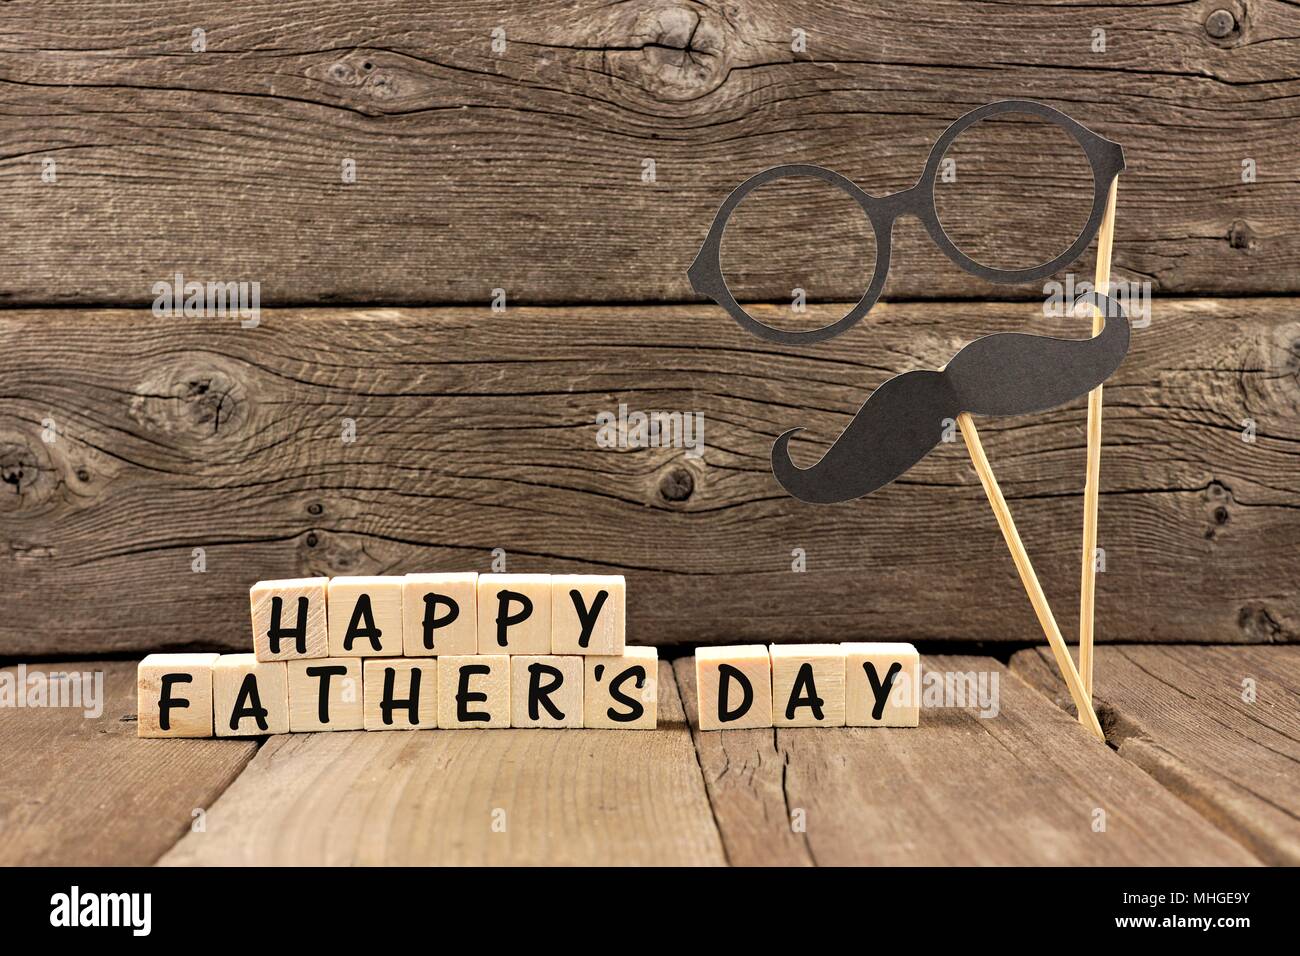 Happy Fathers Day wooden blocks with mustache and glasses against a rustic wooden background Stock Photo